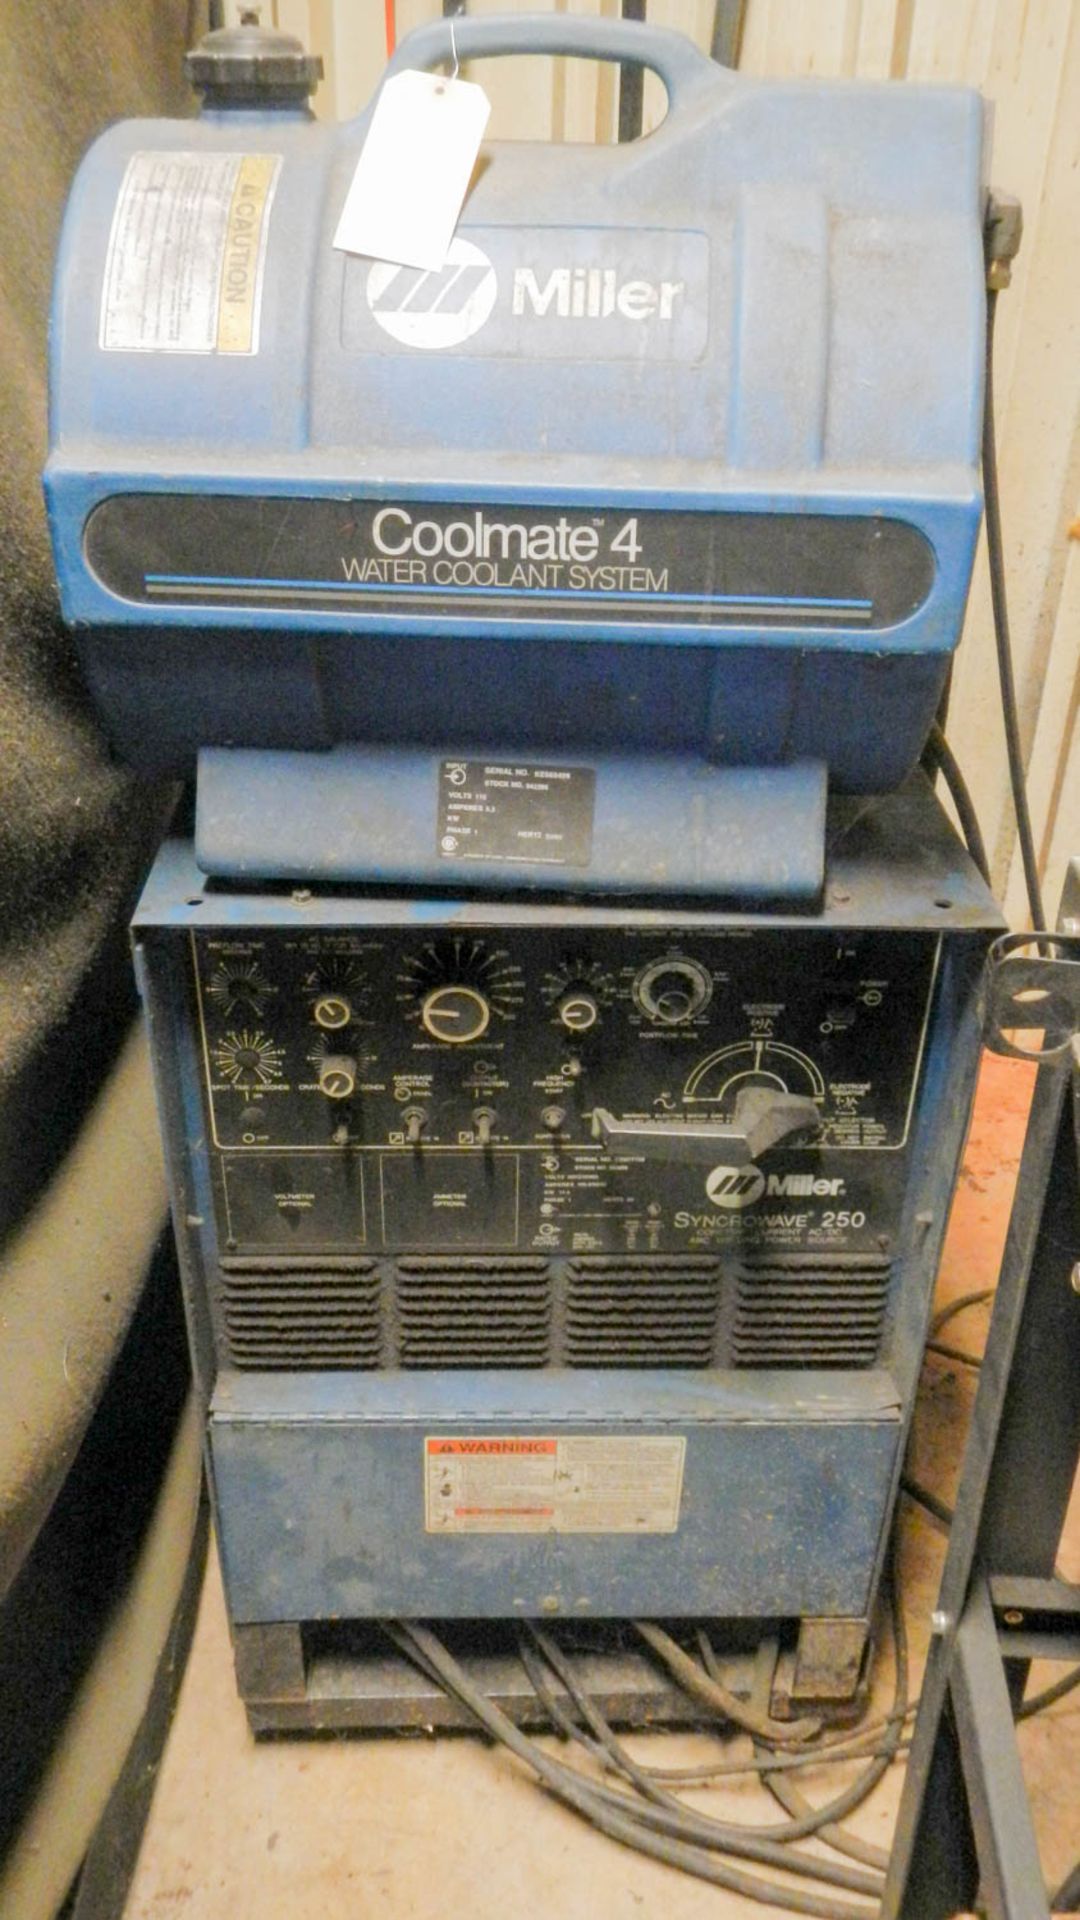 MILLER SYNCROWAVE 250 AC/DC 250-AMP WELDING POWER SOURCE, WITH MILLER COOLMATE 4 WATER COOLER